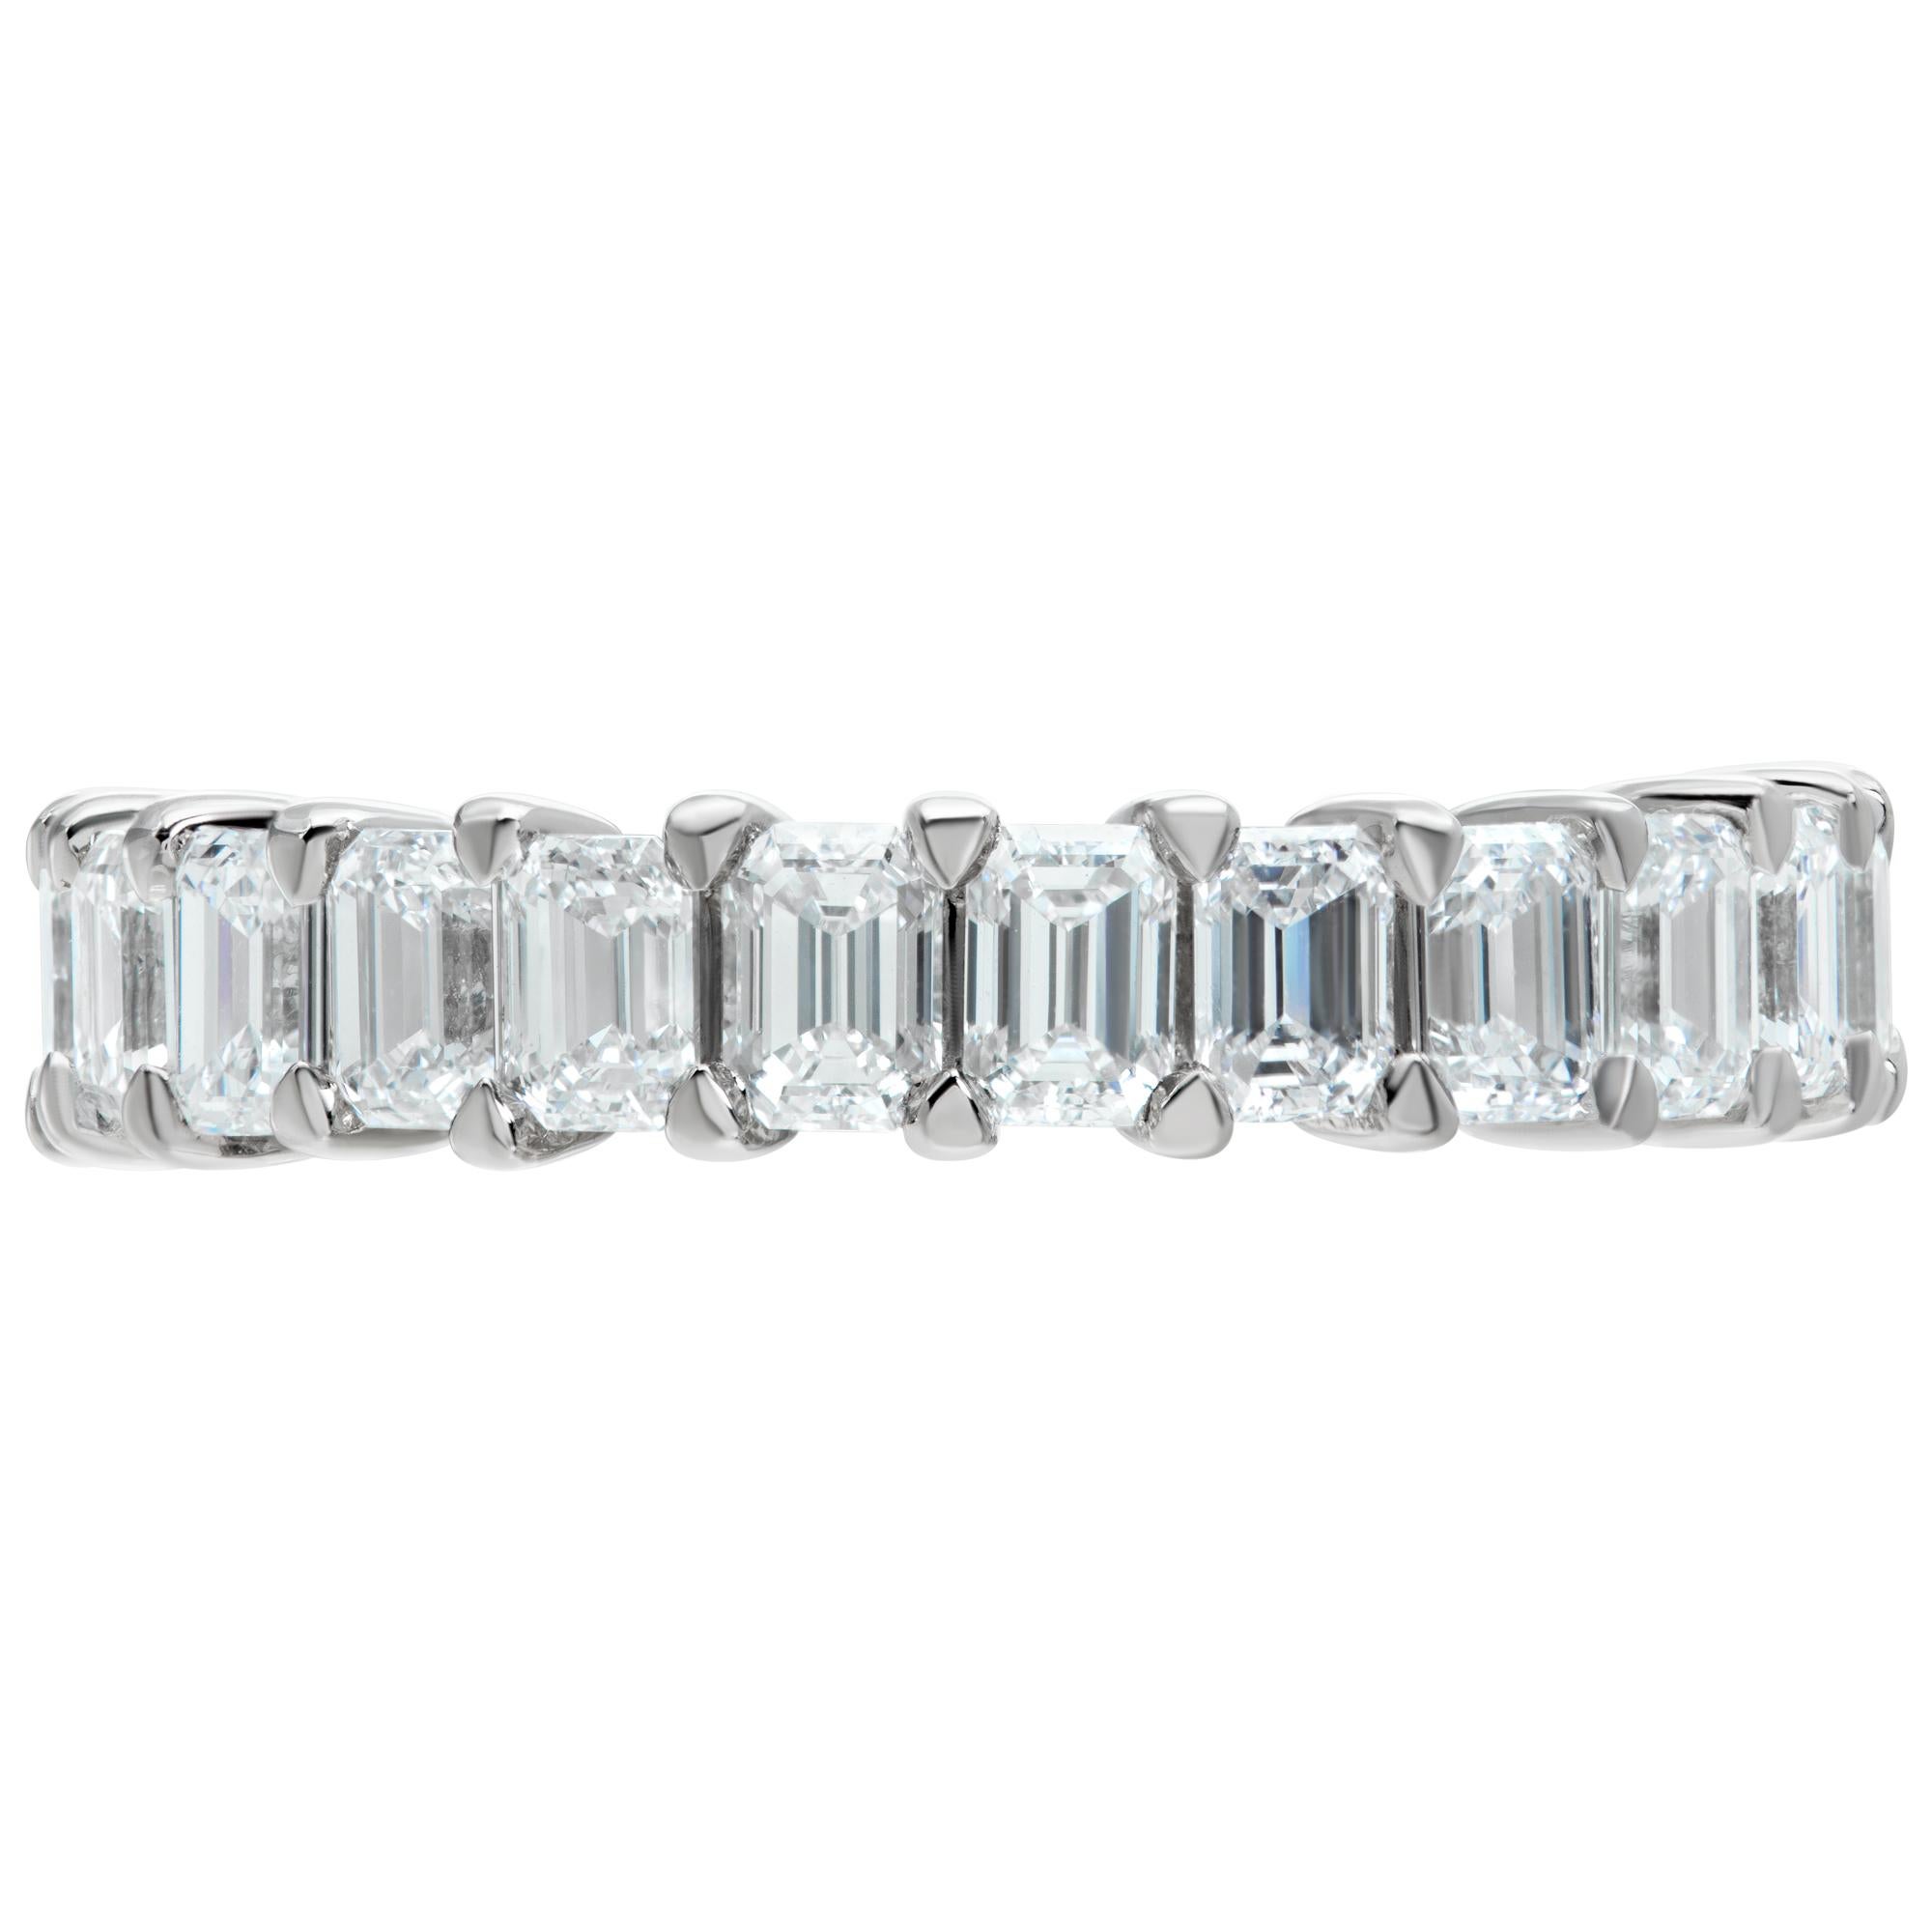 Platinum diamond eternity band with 3.61 carats in G-H color, VS clarity emerald cut diamonds. Size 6.5